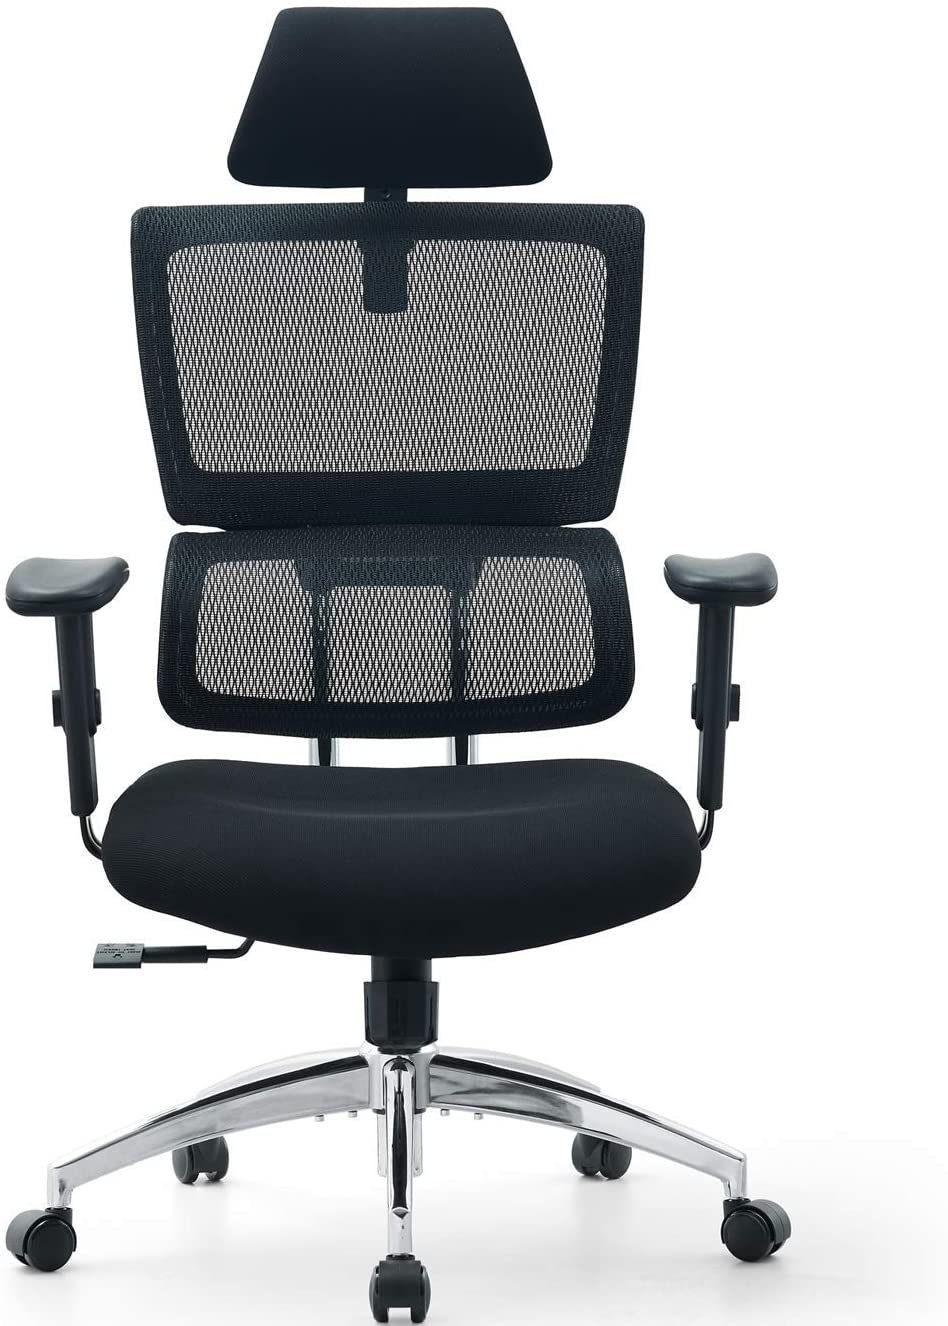 Ticova Ergonomic Office Chair - High Back Desk Chair with Elastic Lumbar Support & Thick Seat Cushion - 140°Reclining & Rocking Mesh Computer Chair with Adjustable Headrest, Armrest - image 1 of 5